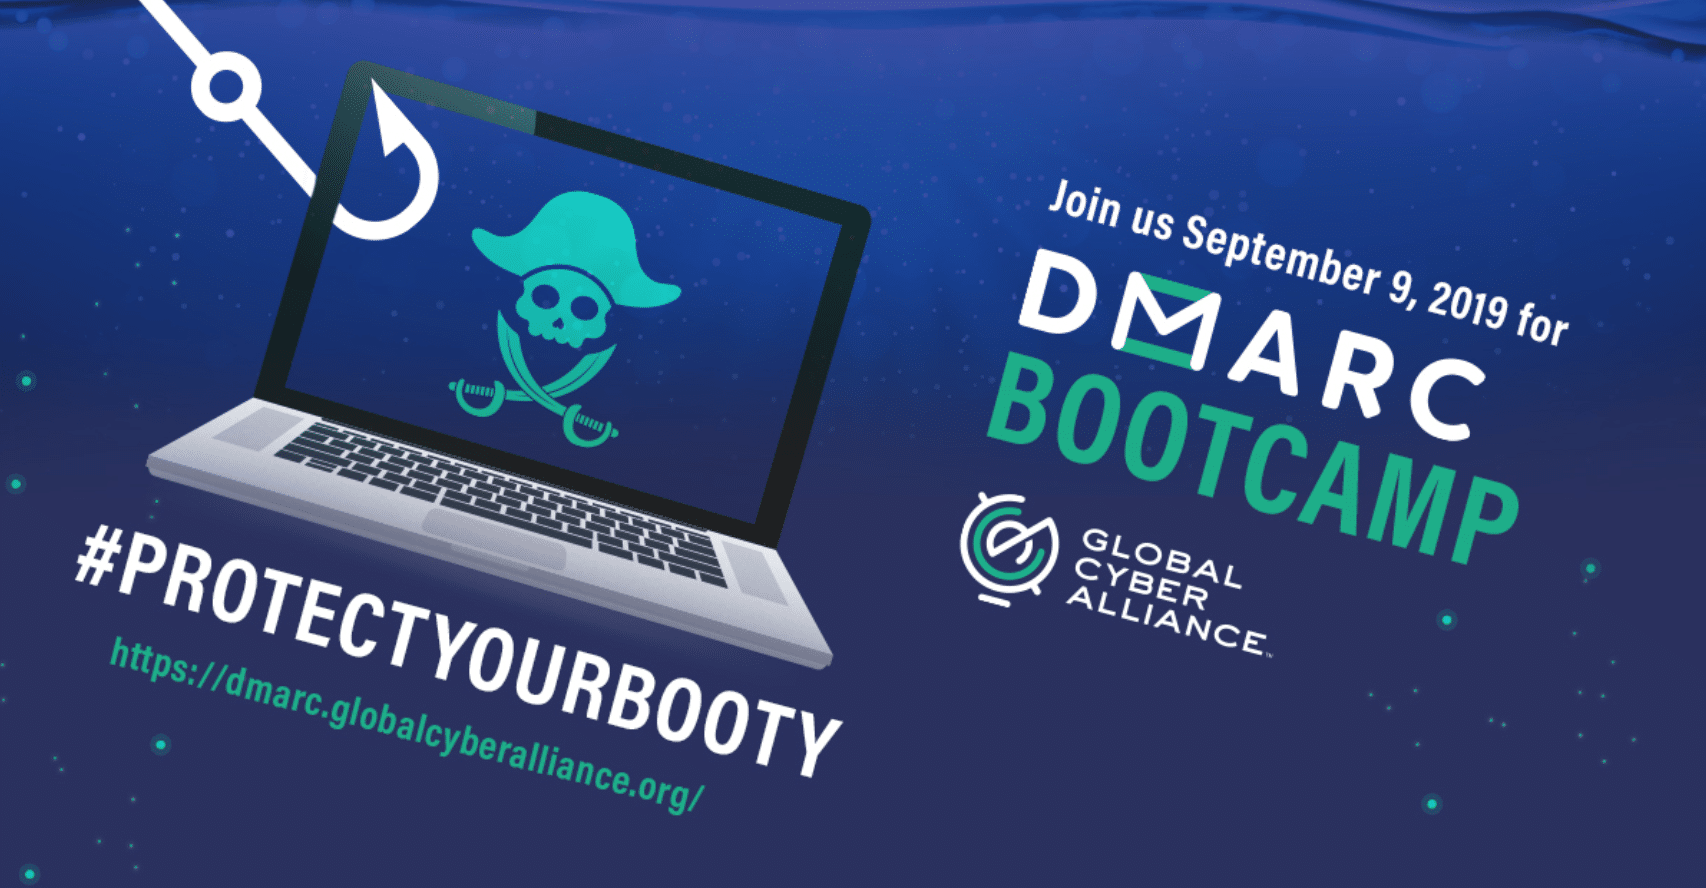 The Global Cyber Alliance's DMARC Bootcamp starts September 9th, 2019.